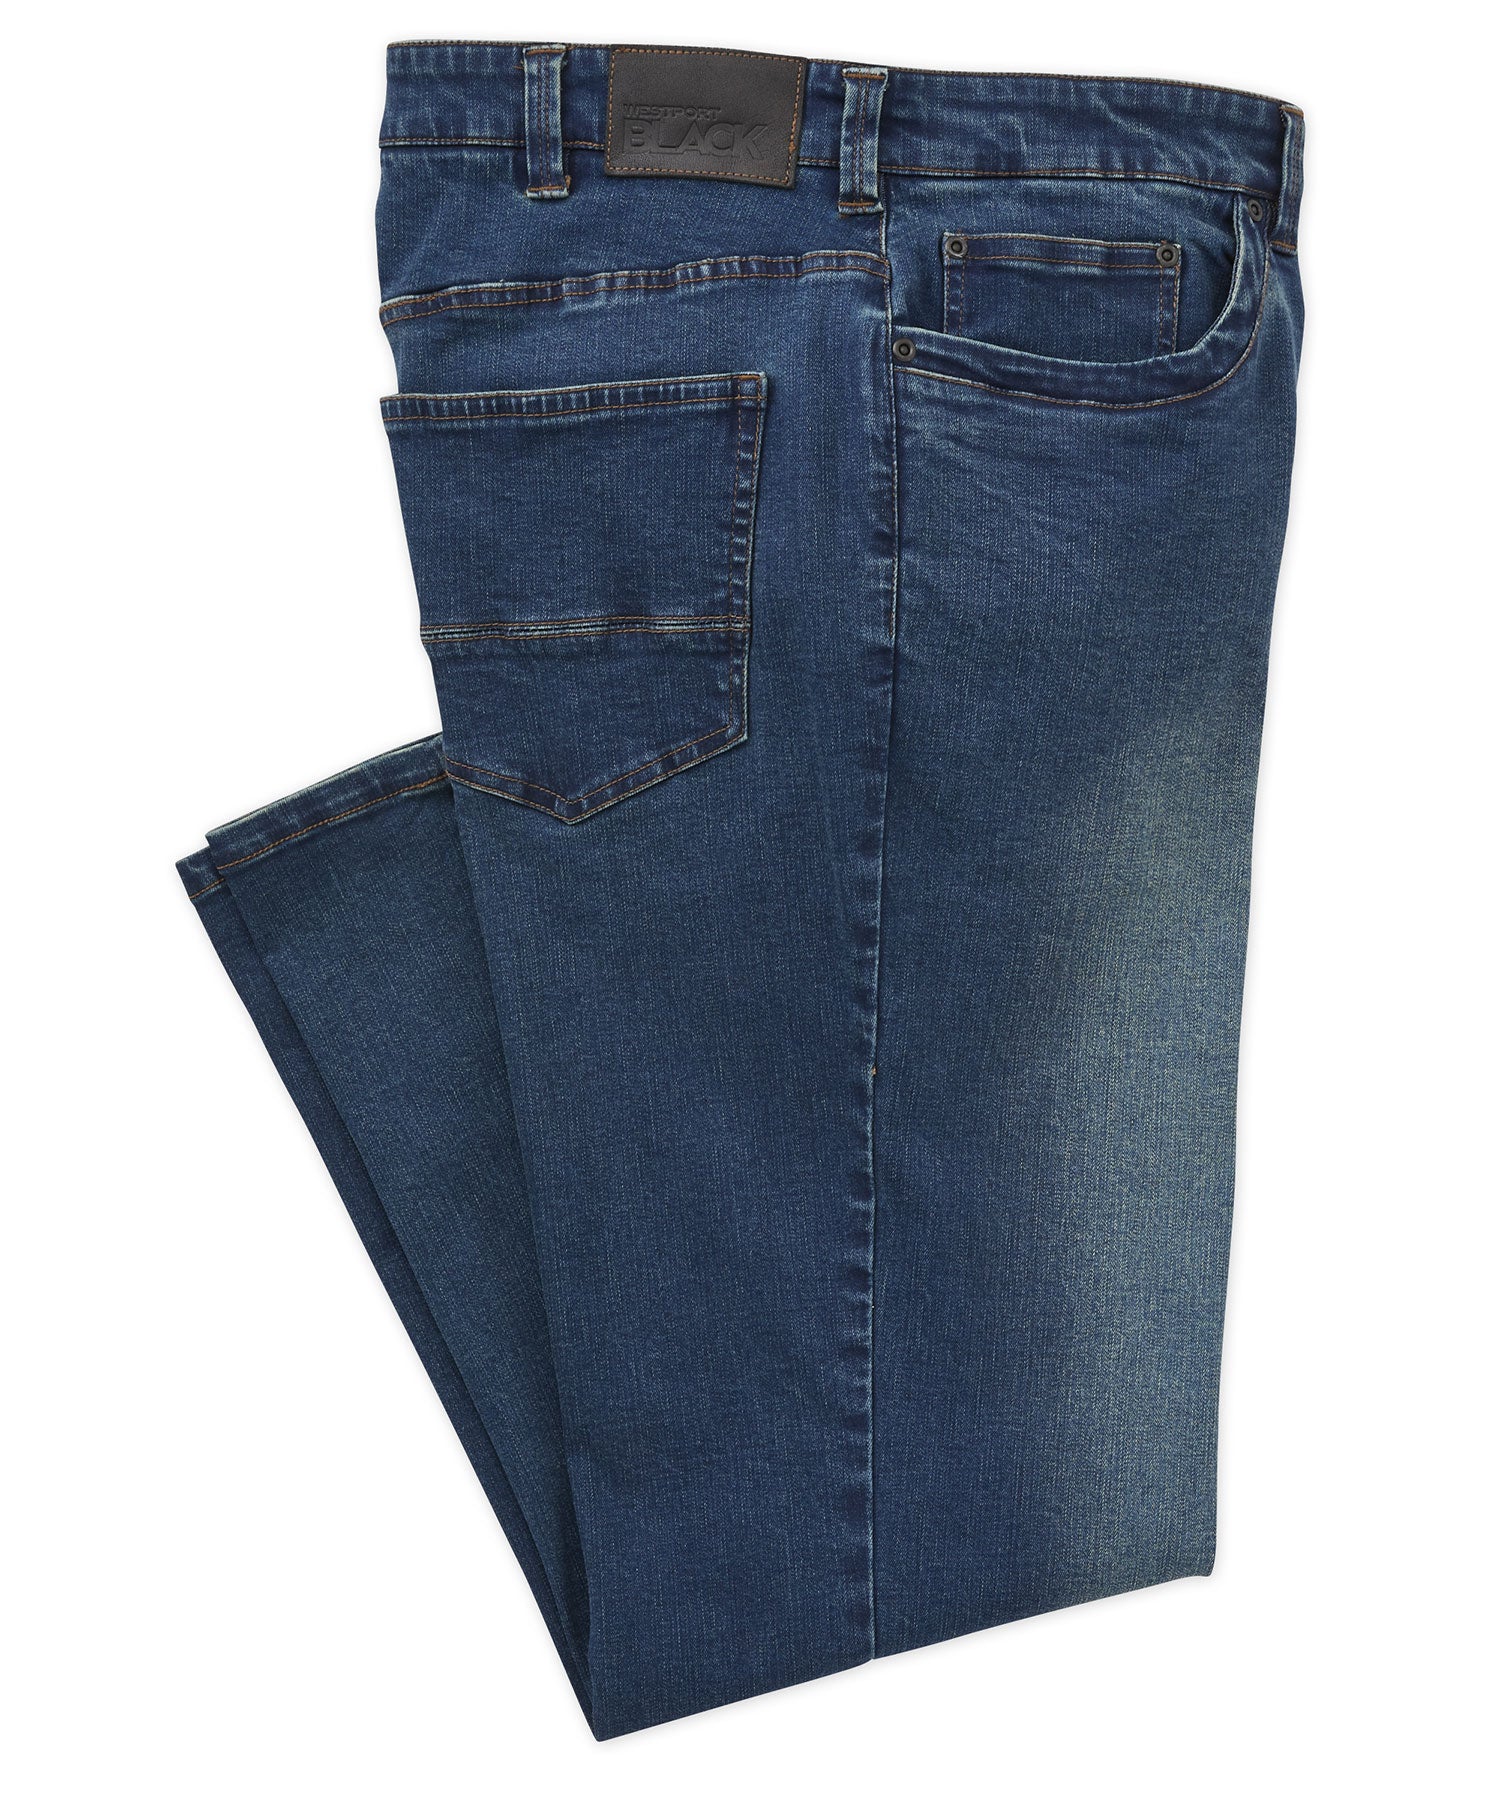 Blue The Tasty Utility Sneak Cuff wide-leg jeans | MOTHER | MATCHES UK